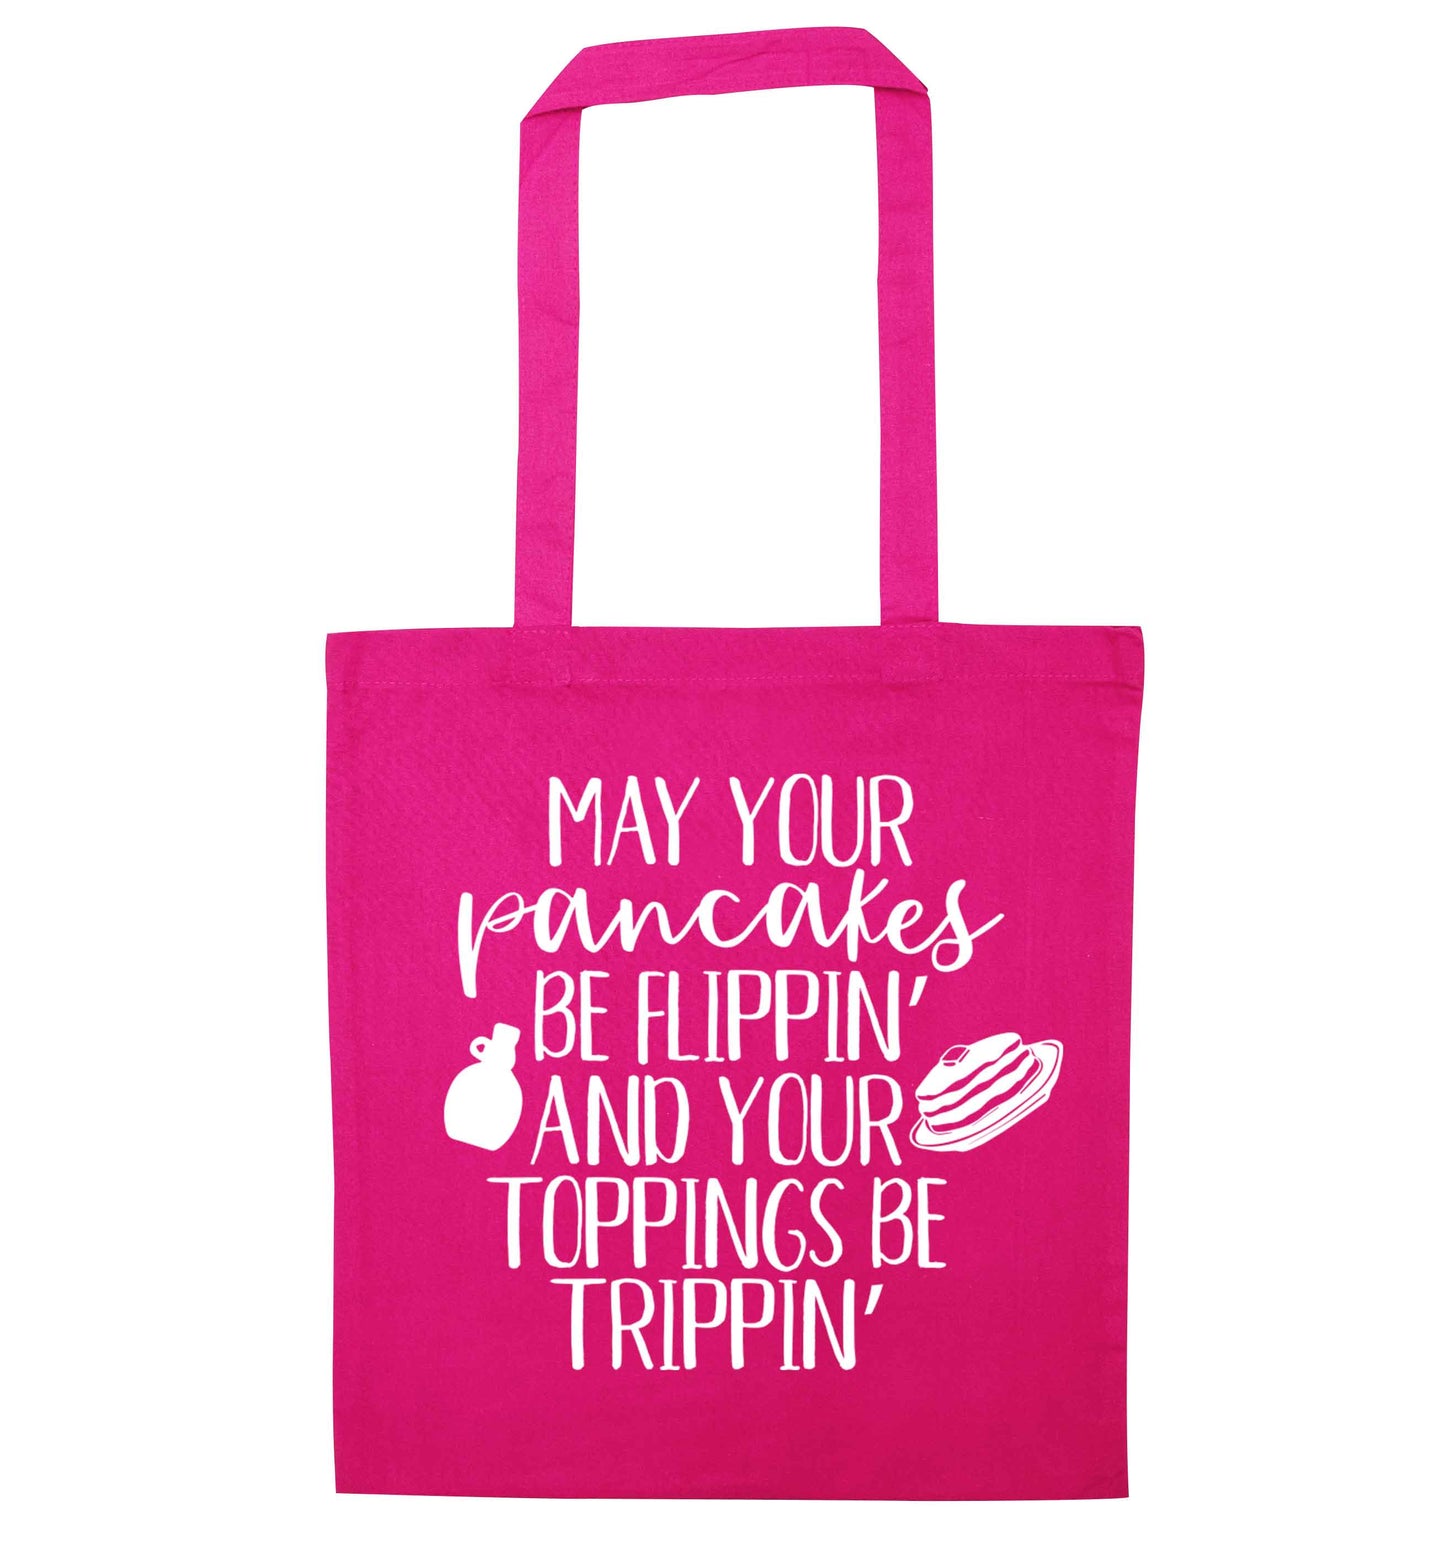 May your pancakes be flippin' and your toppings be trippin' pink tote bag